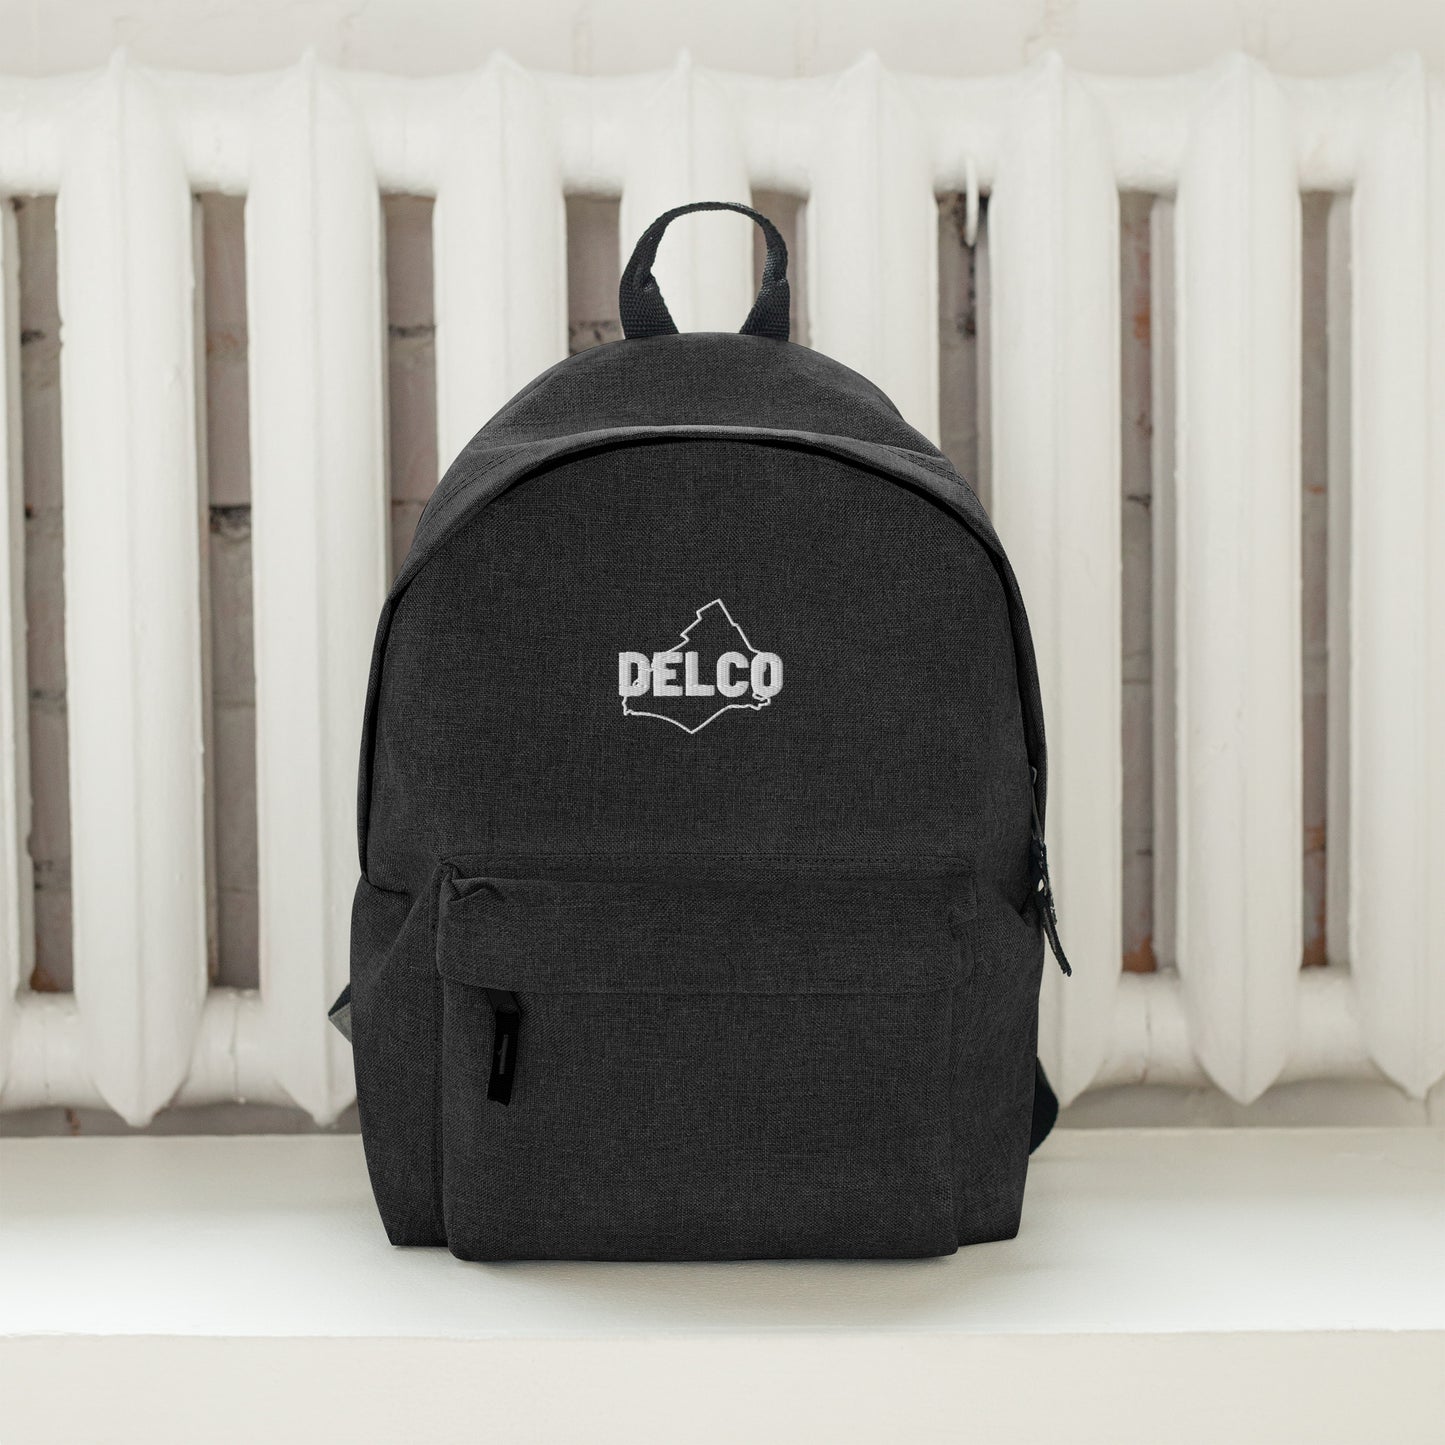 Delco Brand Embroidered Backpack